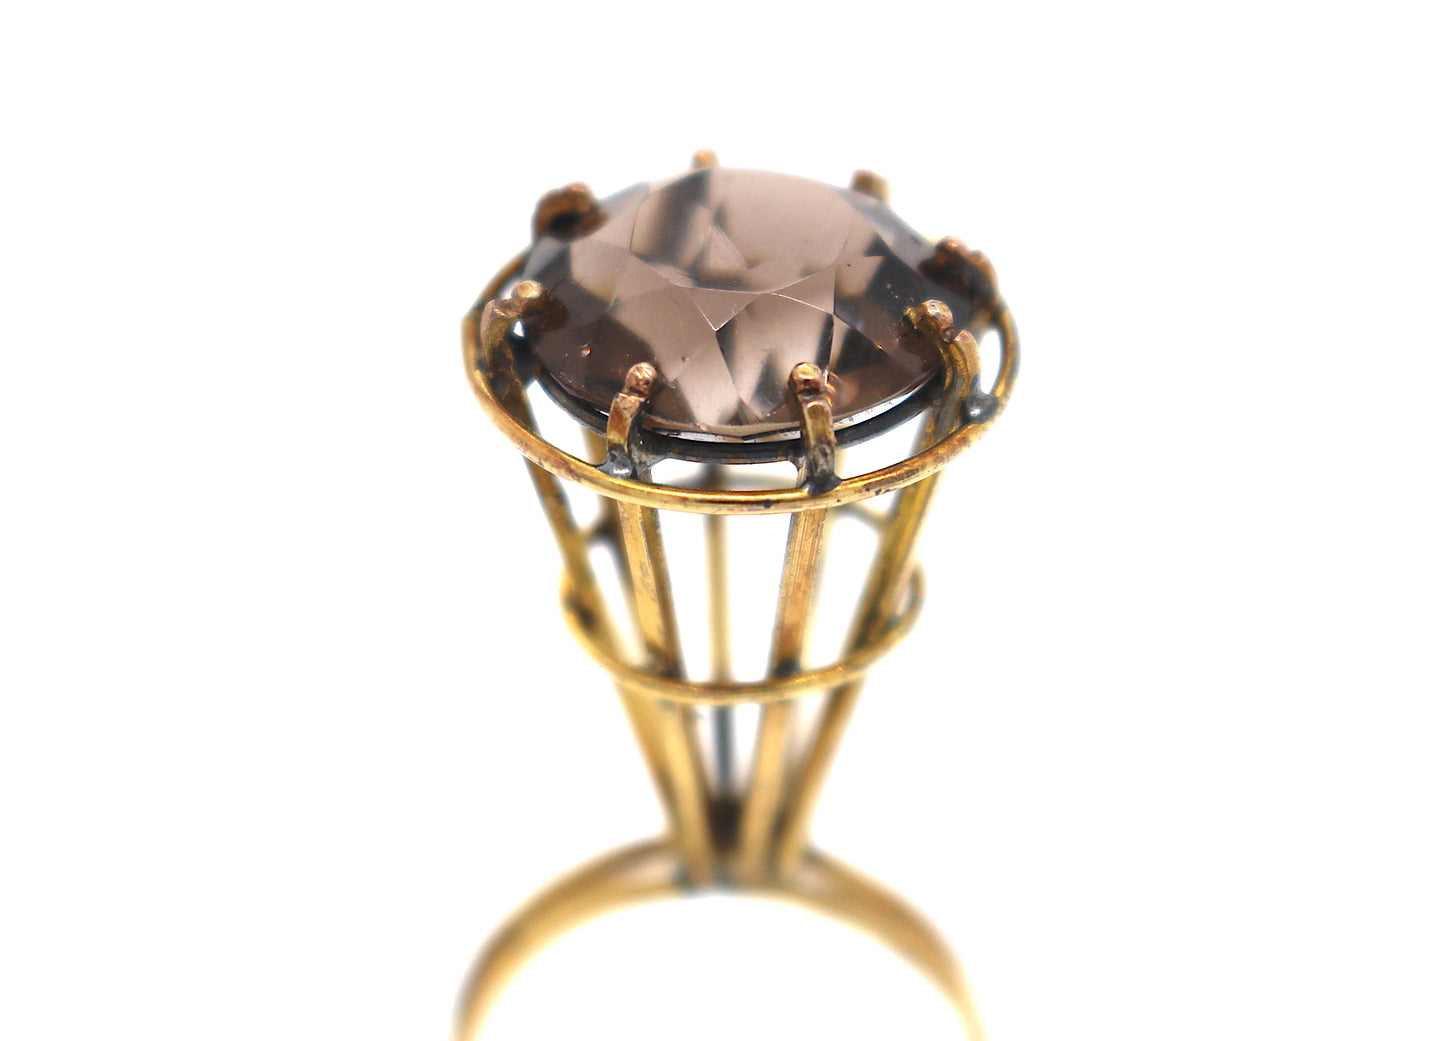 18ct gold solitaire ring by Constantinos Kyriacou. With Smokey Quartz. 2004